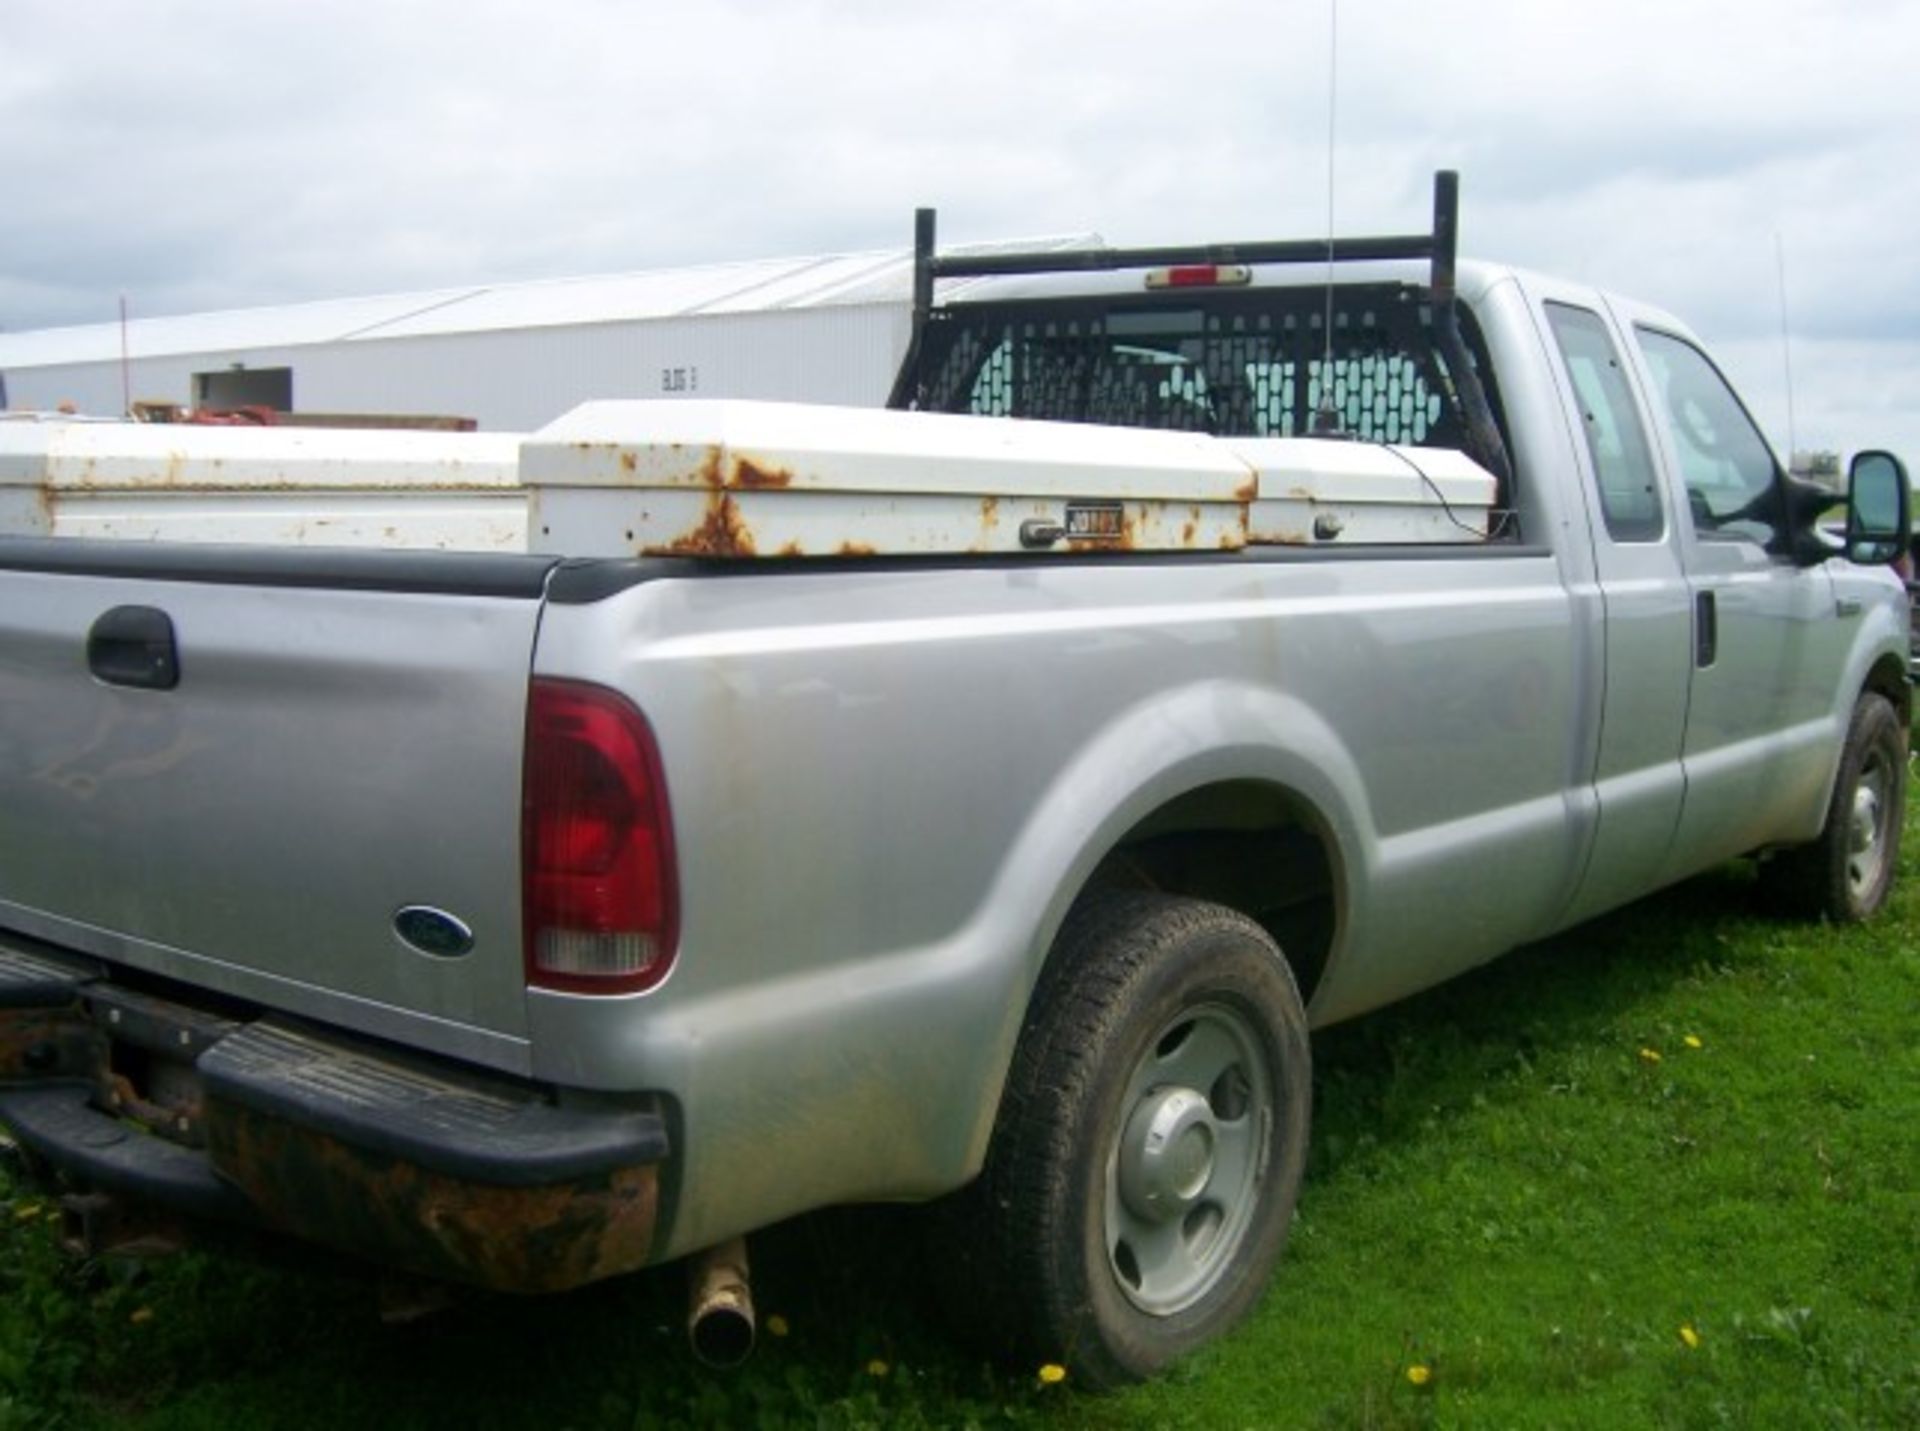 2005 Ford F-350 XL, Super Duty, ext cab, 4x2, 183,113-miles, w/mtd toolboxes, VIN:1FTSX30515EC46518 - Image 2 of 3